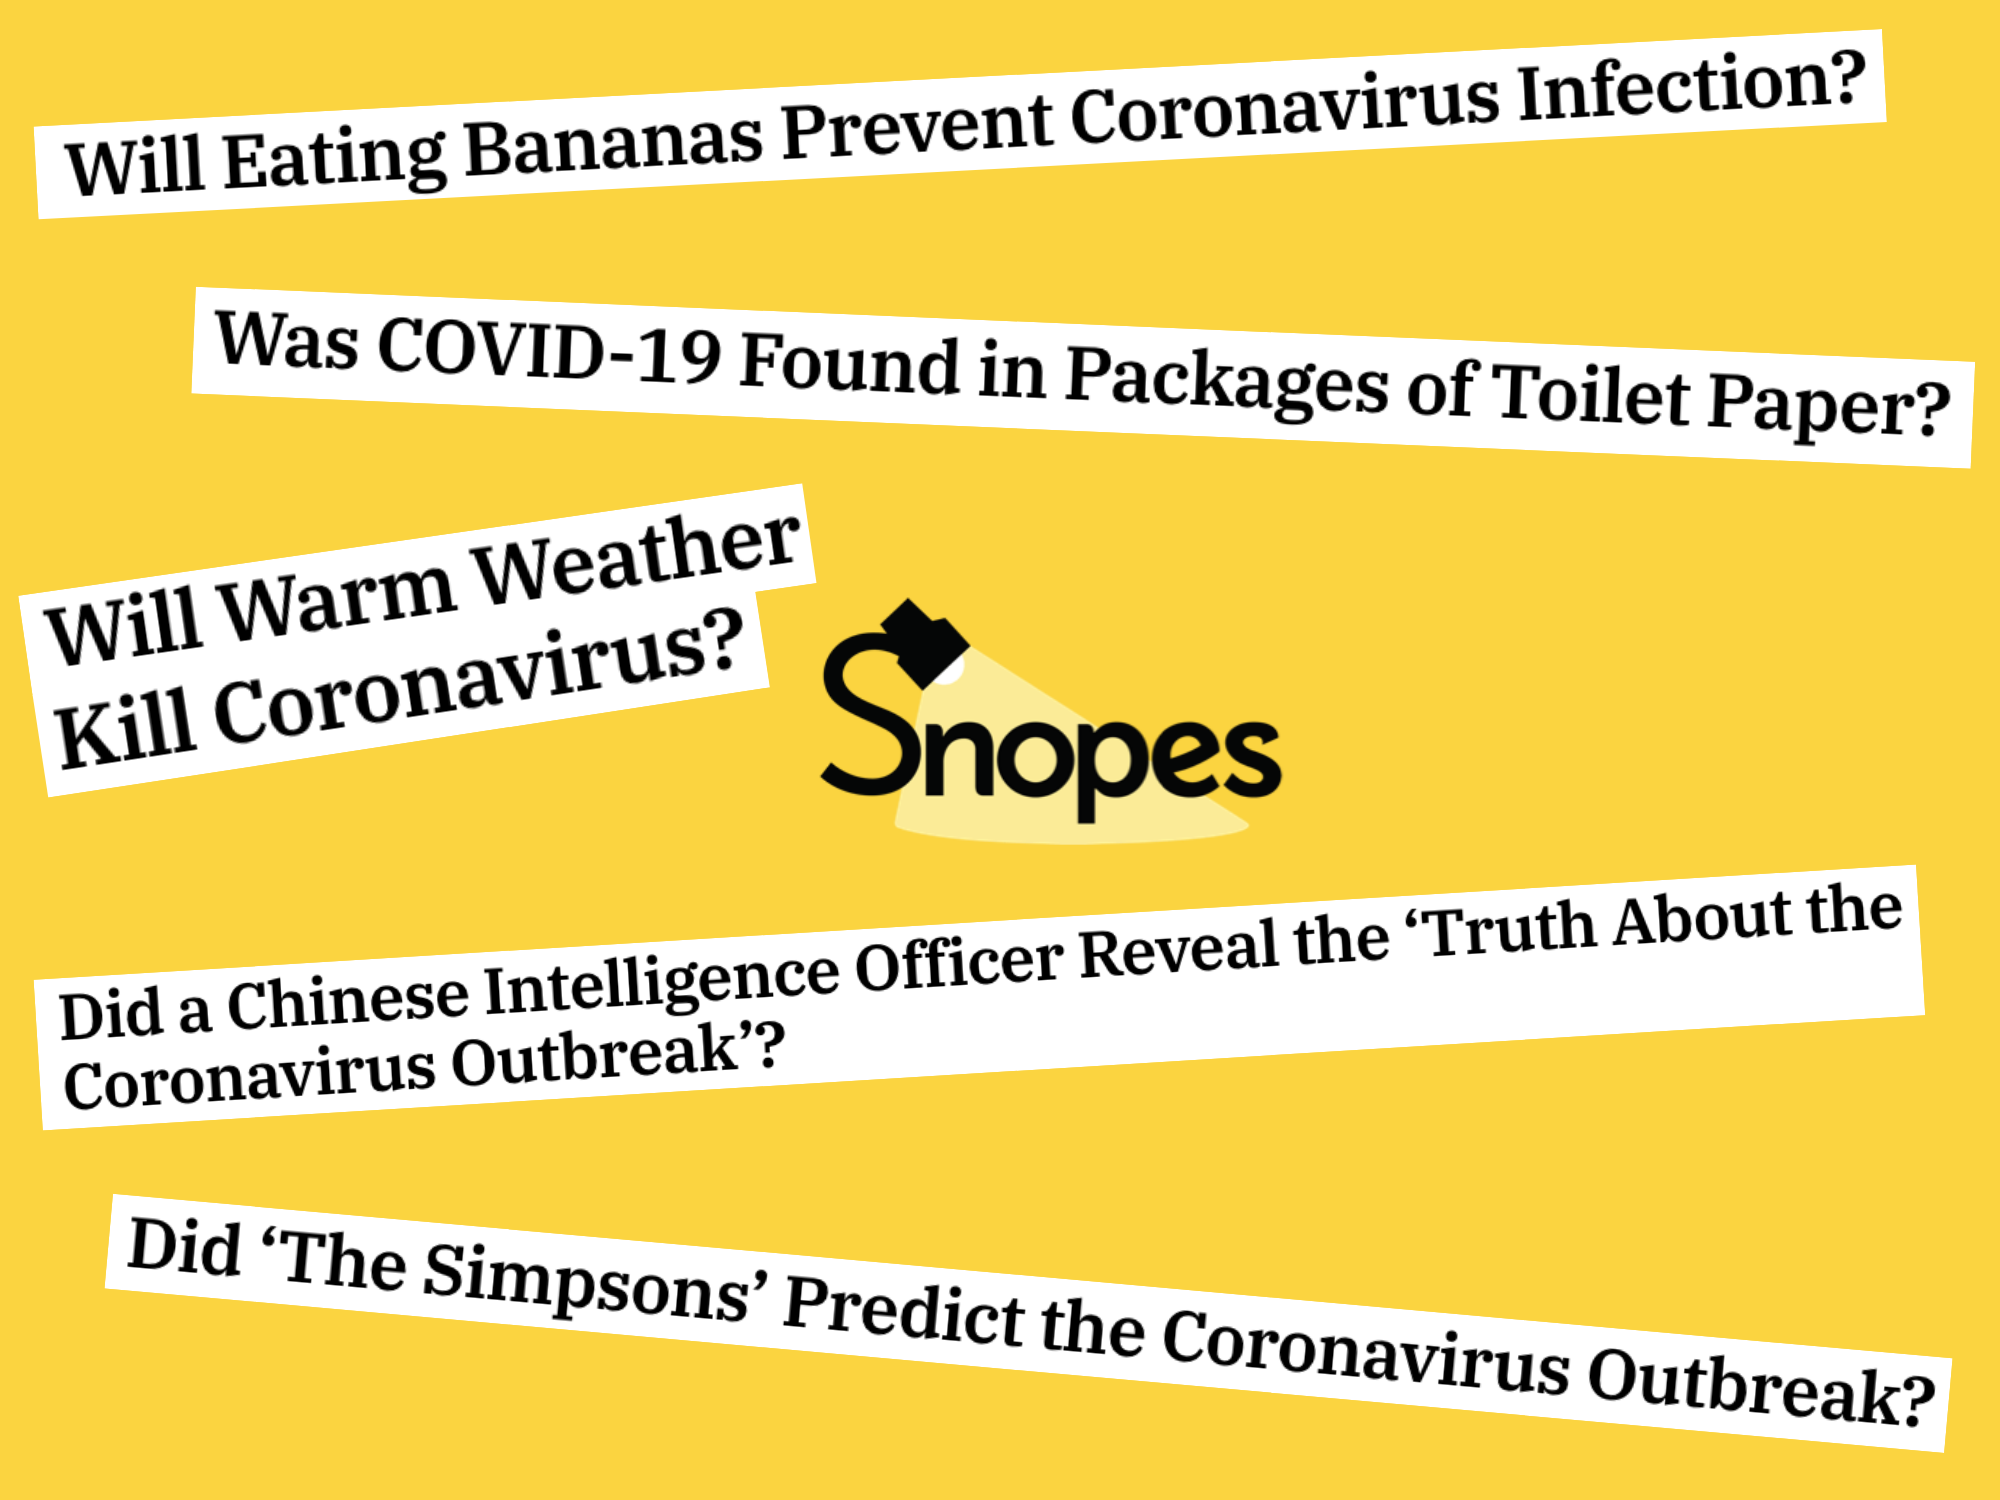 Is Snopes Reliable?